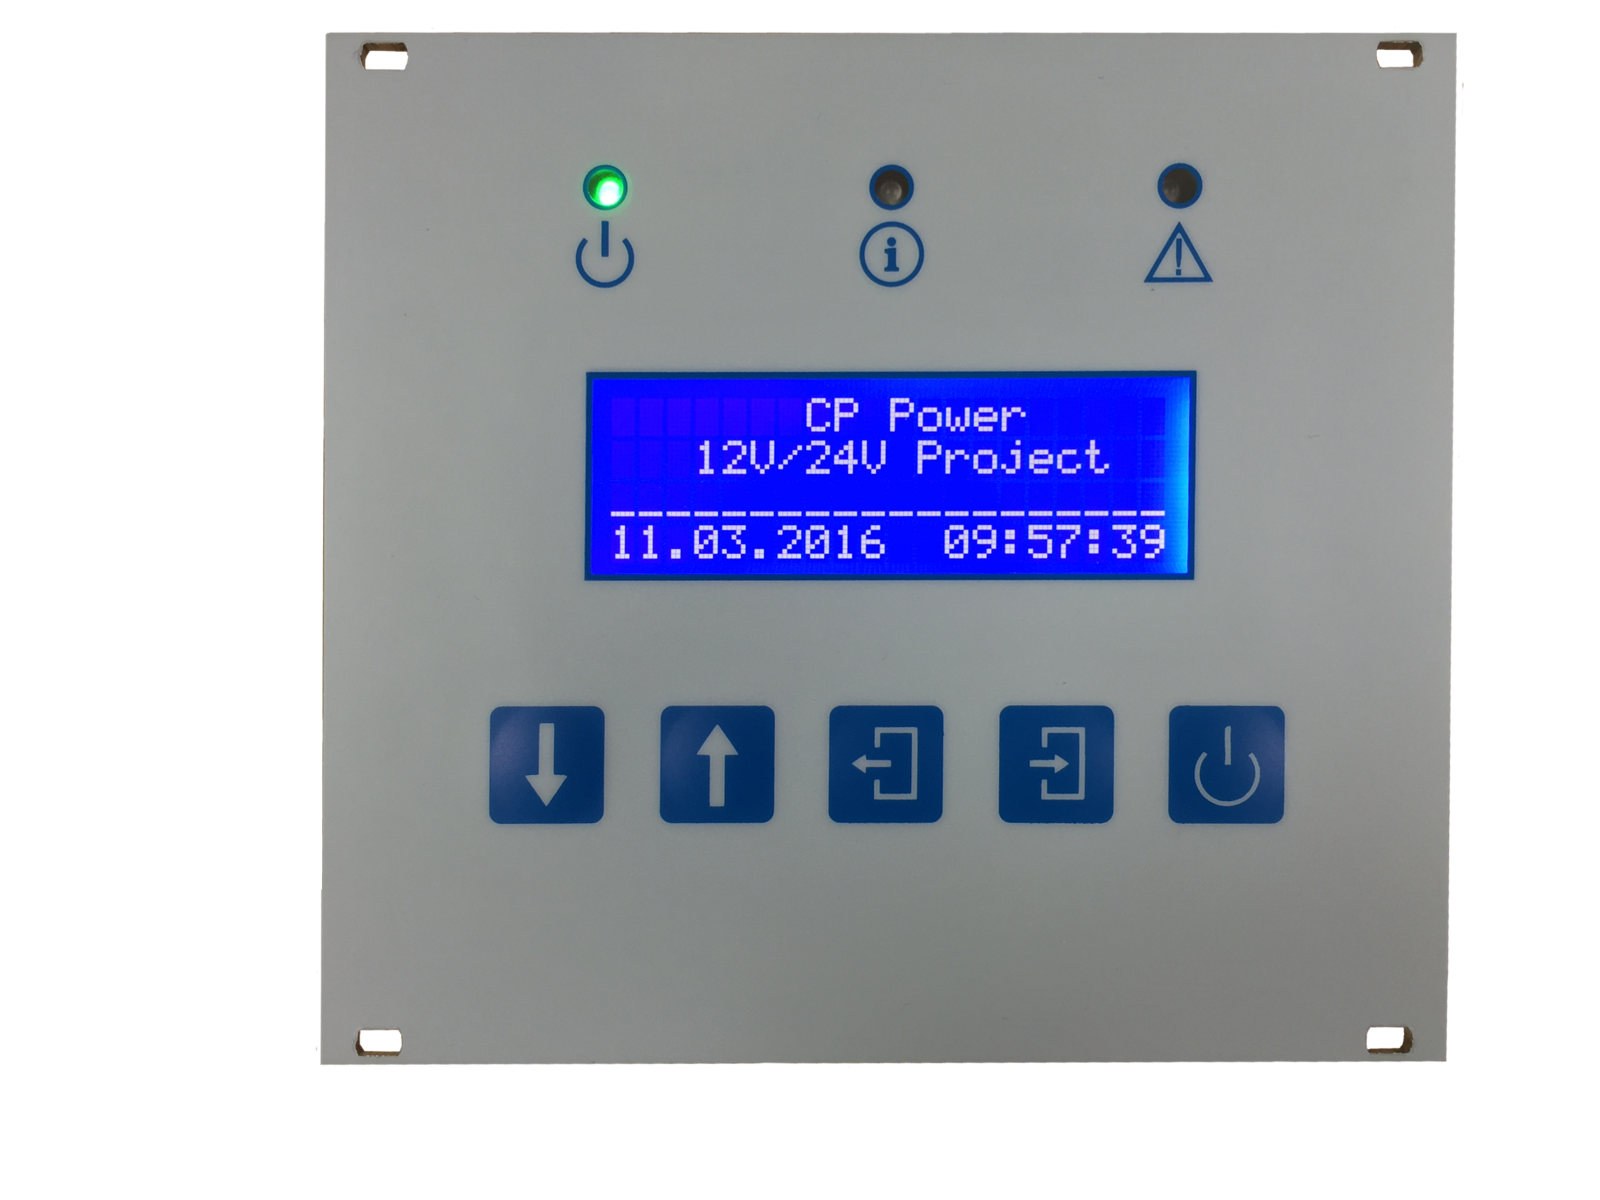 USV14, a Display with LCD screen and buttons for changing parameters